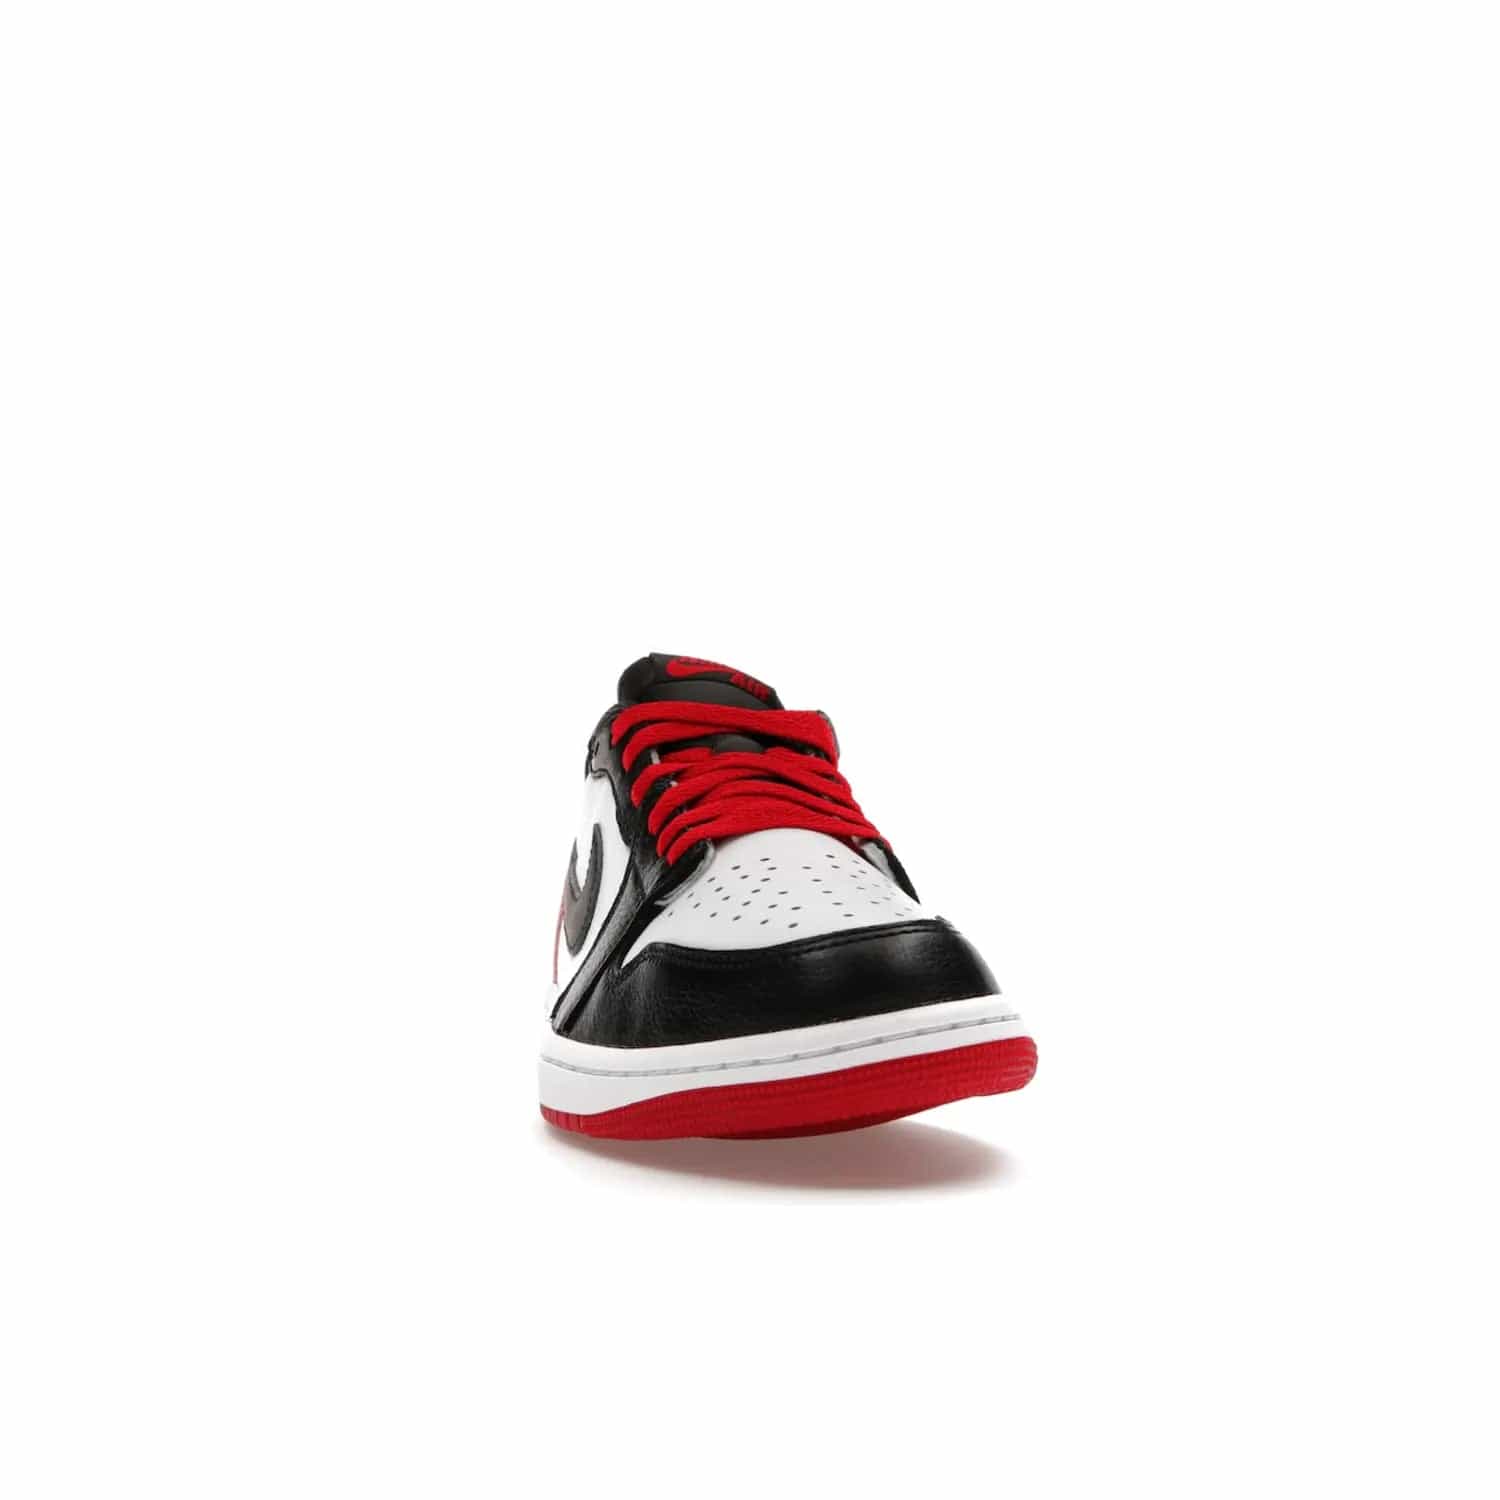 Jordan 1 Retro Low OG Black Toe (2023) - Image 9 - Only at www.BallersClubKickz.com - Upgrade your wardrobe with the Jordan 1 Retro Low OG Black Toe featuring a classic black and white upper and dynamic red heel counter. Eye-catching white midsole and iconic black Swoosh and Wings complete the timeless yet modern look. Shop now to own this iconic shoe!